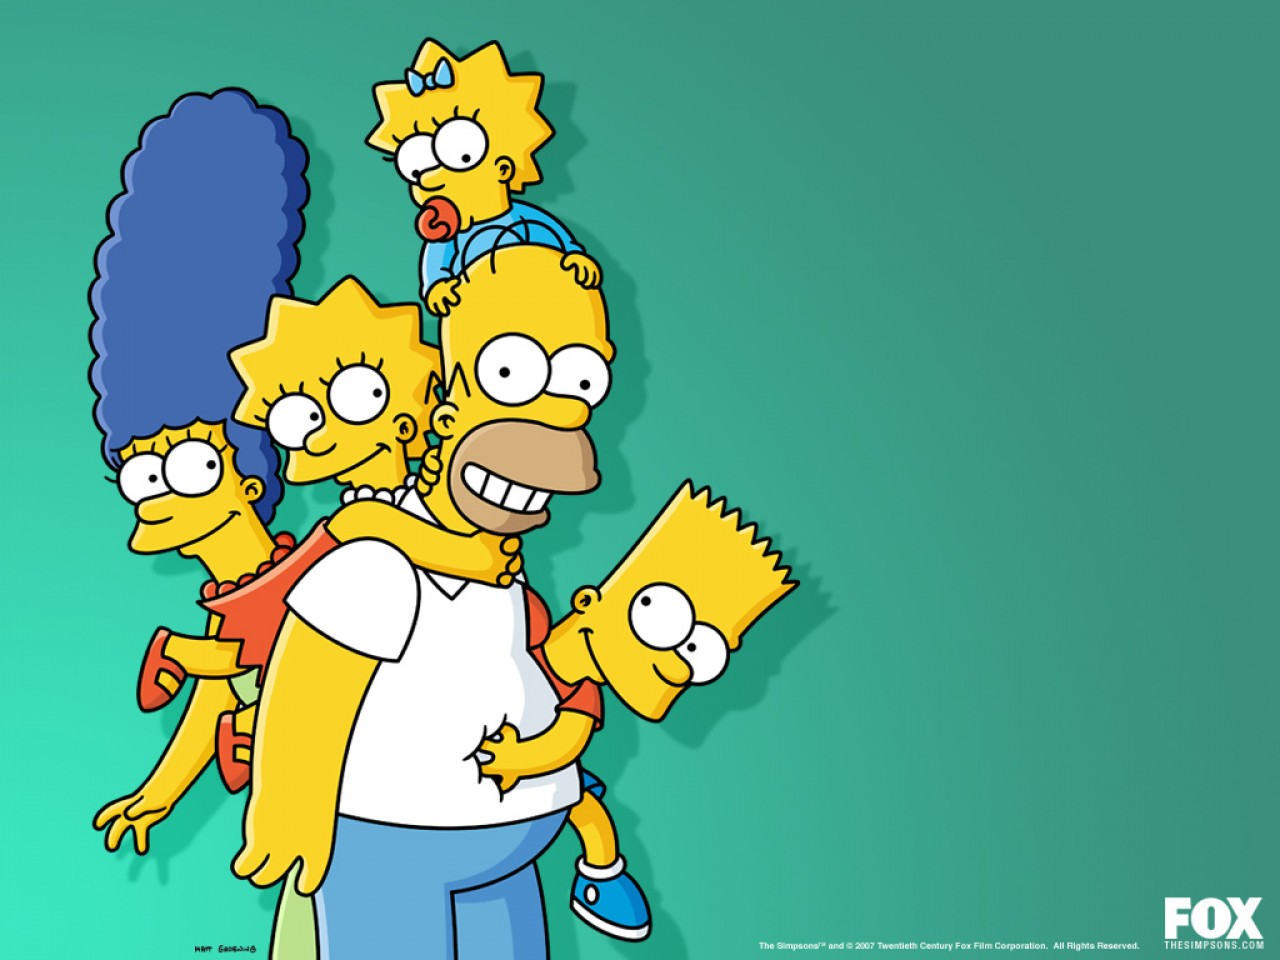 Download Marge Simpson wallpaper for mobile phone, free Marge Simpson HD picture